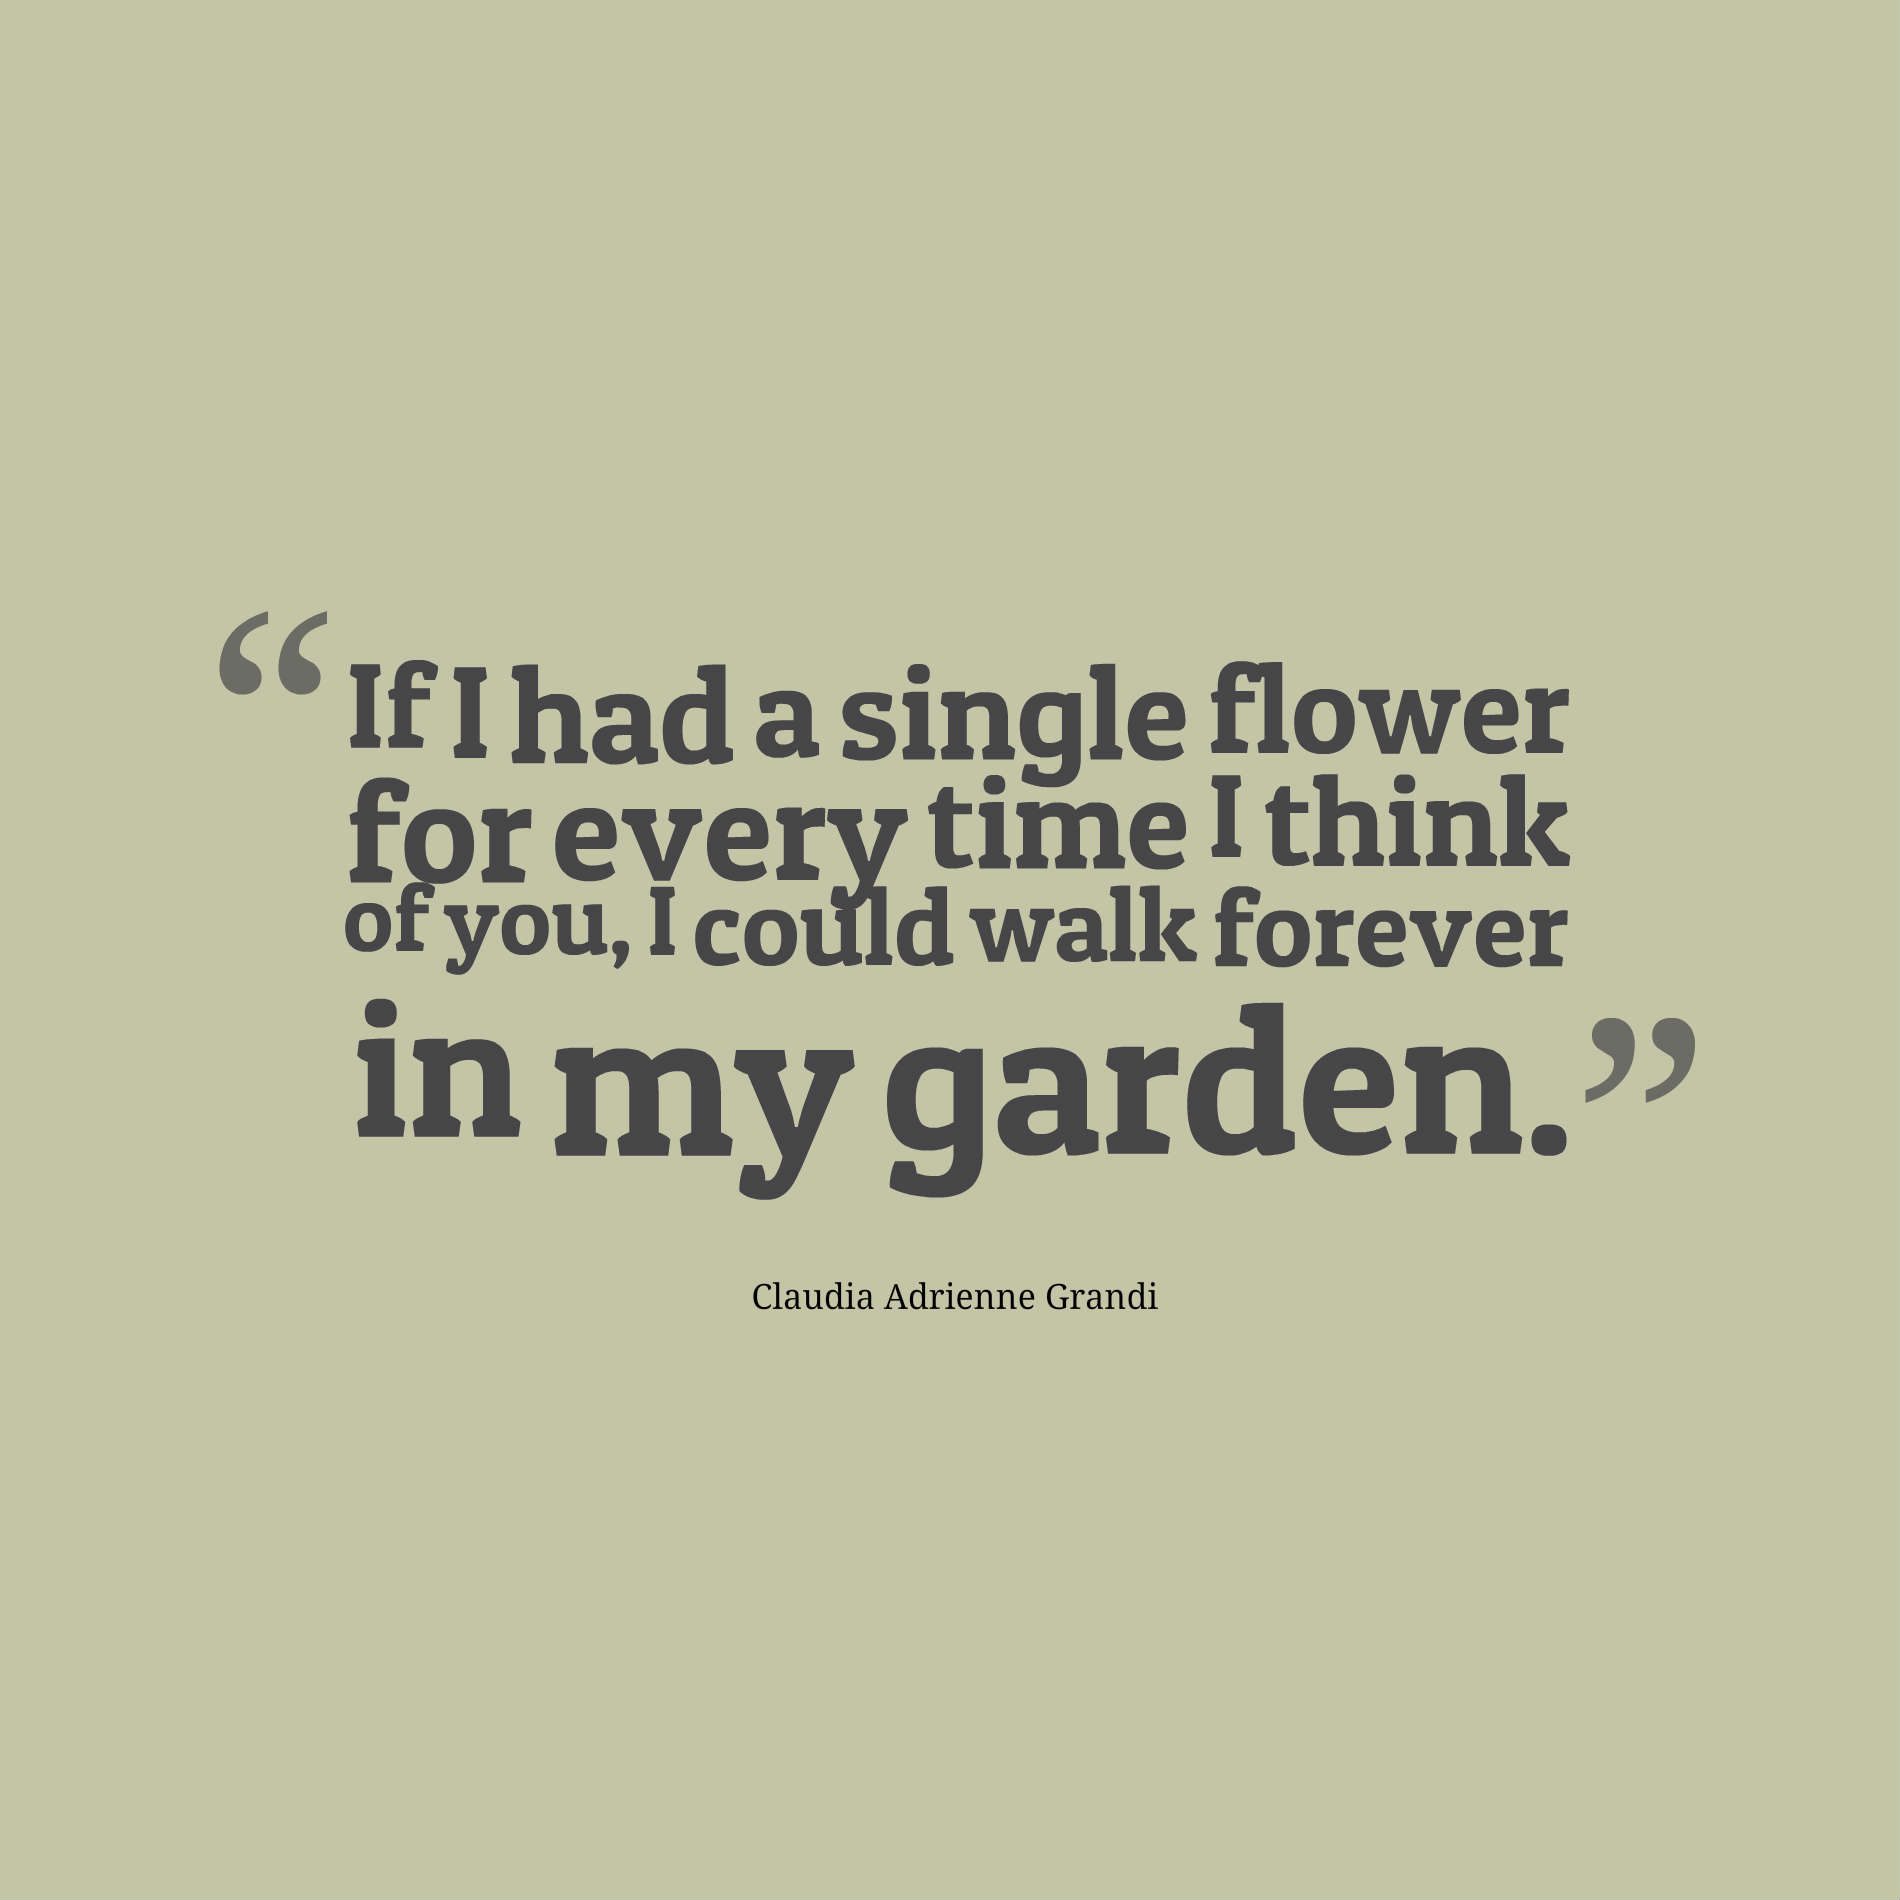 If I had a single flower for every time I think of you, I could walk forever in my garden.